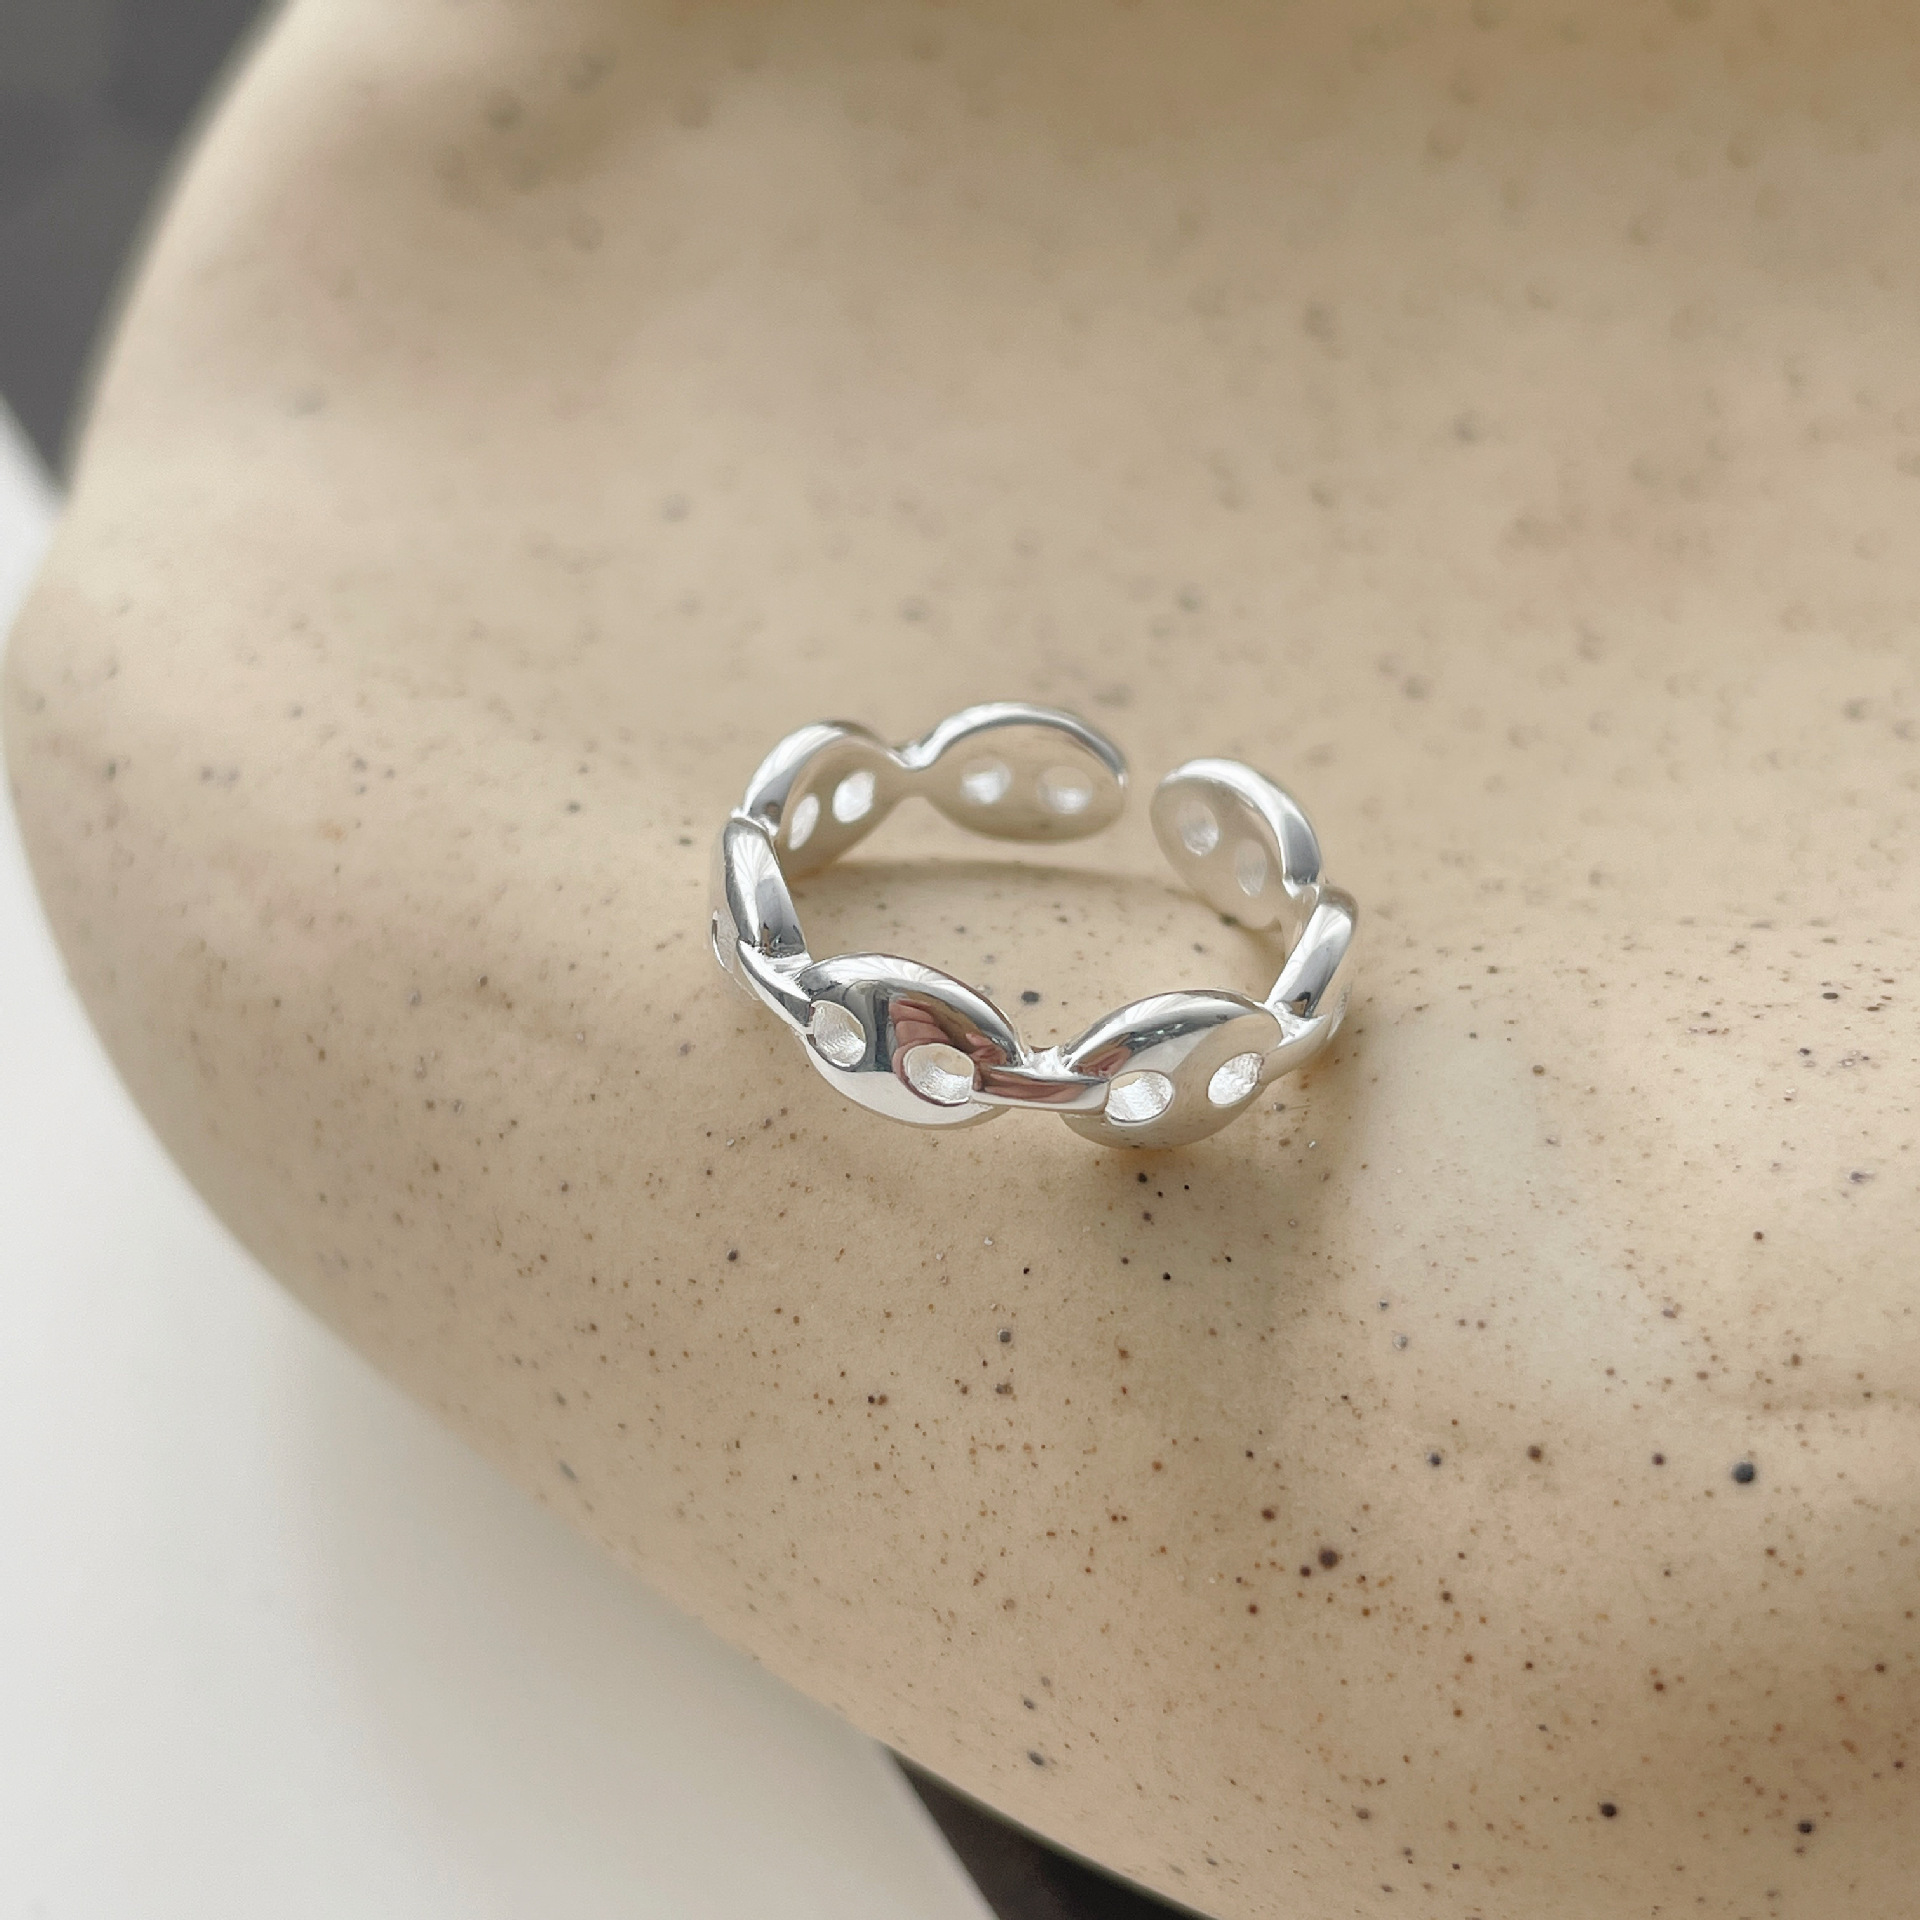 Tiqi Korean Style Korean Jewelry Xiaohongshu Same Style Ins Style 925 Sterling Silver Pig Nose Ring Index Finger Ring Female